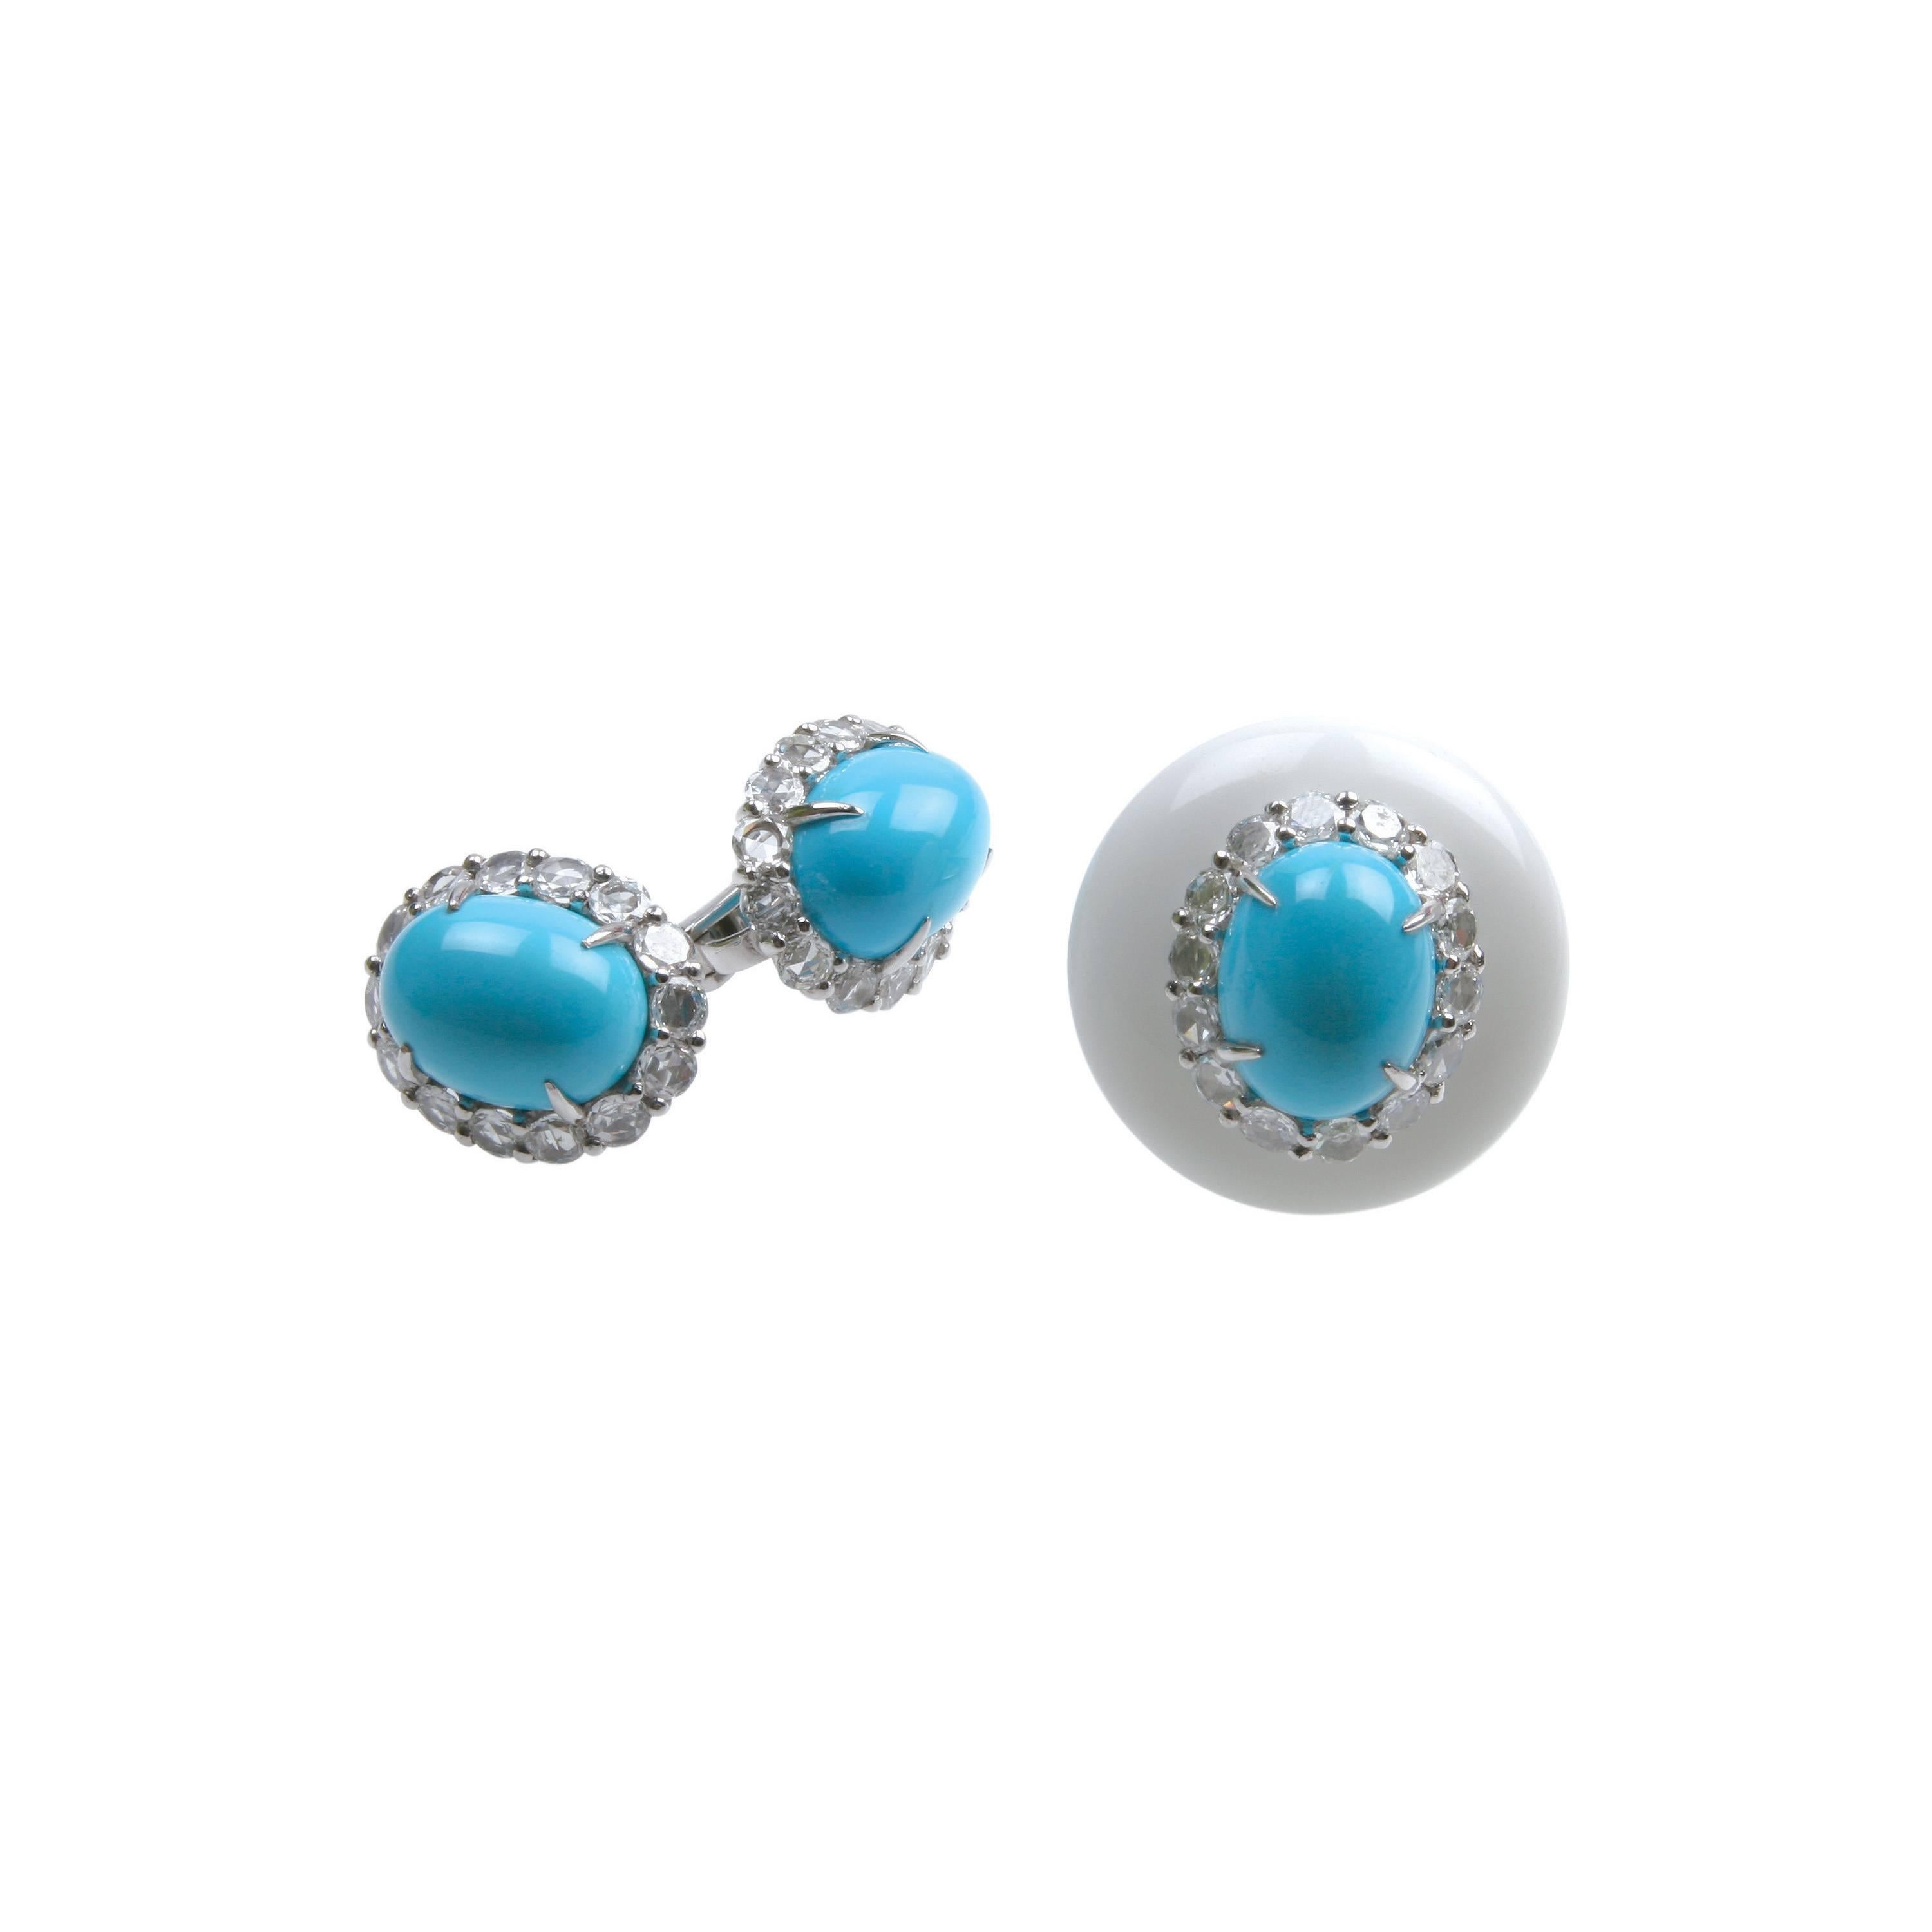 Rose Cut Youmna Fine Jewellery 18K White Gold, Turquoise, Diamonds Ring & Earrings Suite For Sale